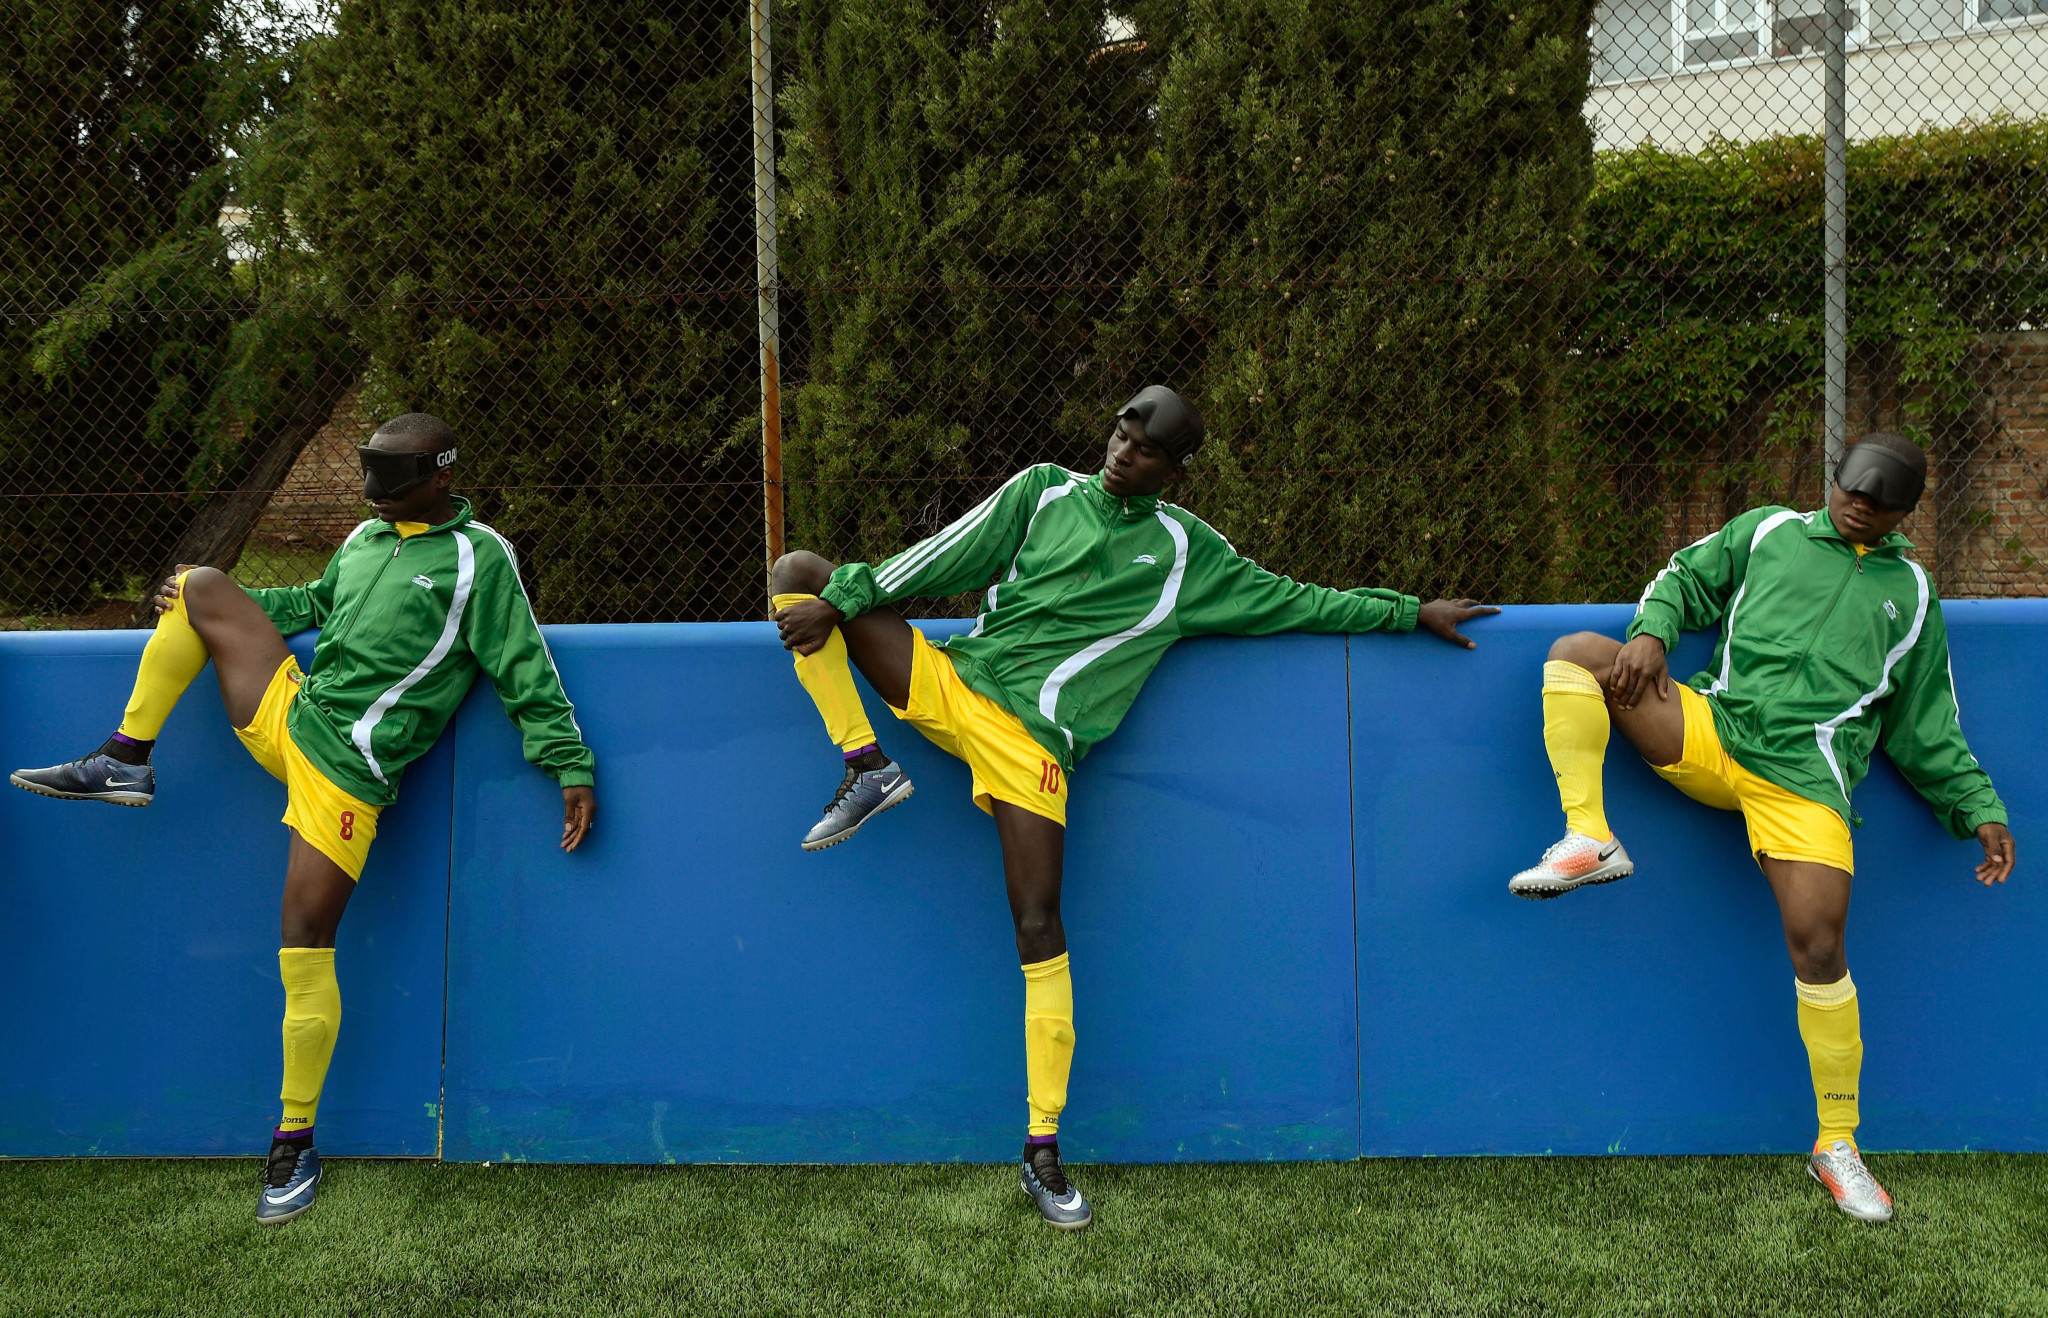 Mali blind football players warming up before a match in Madrid ©Getty Images